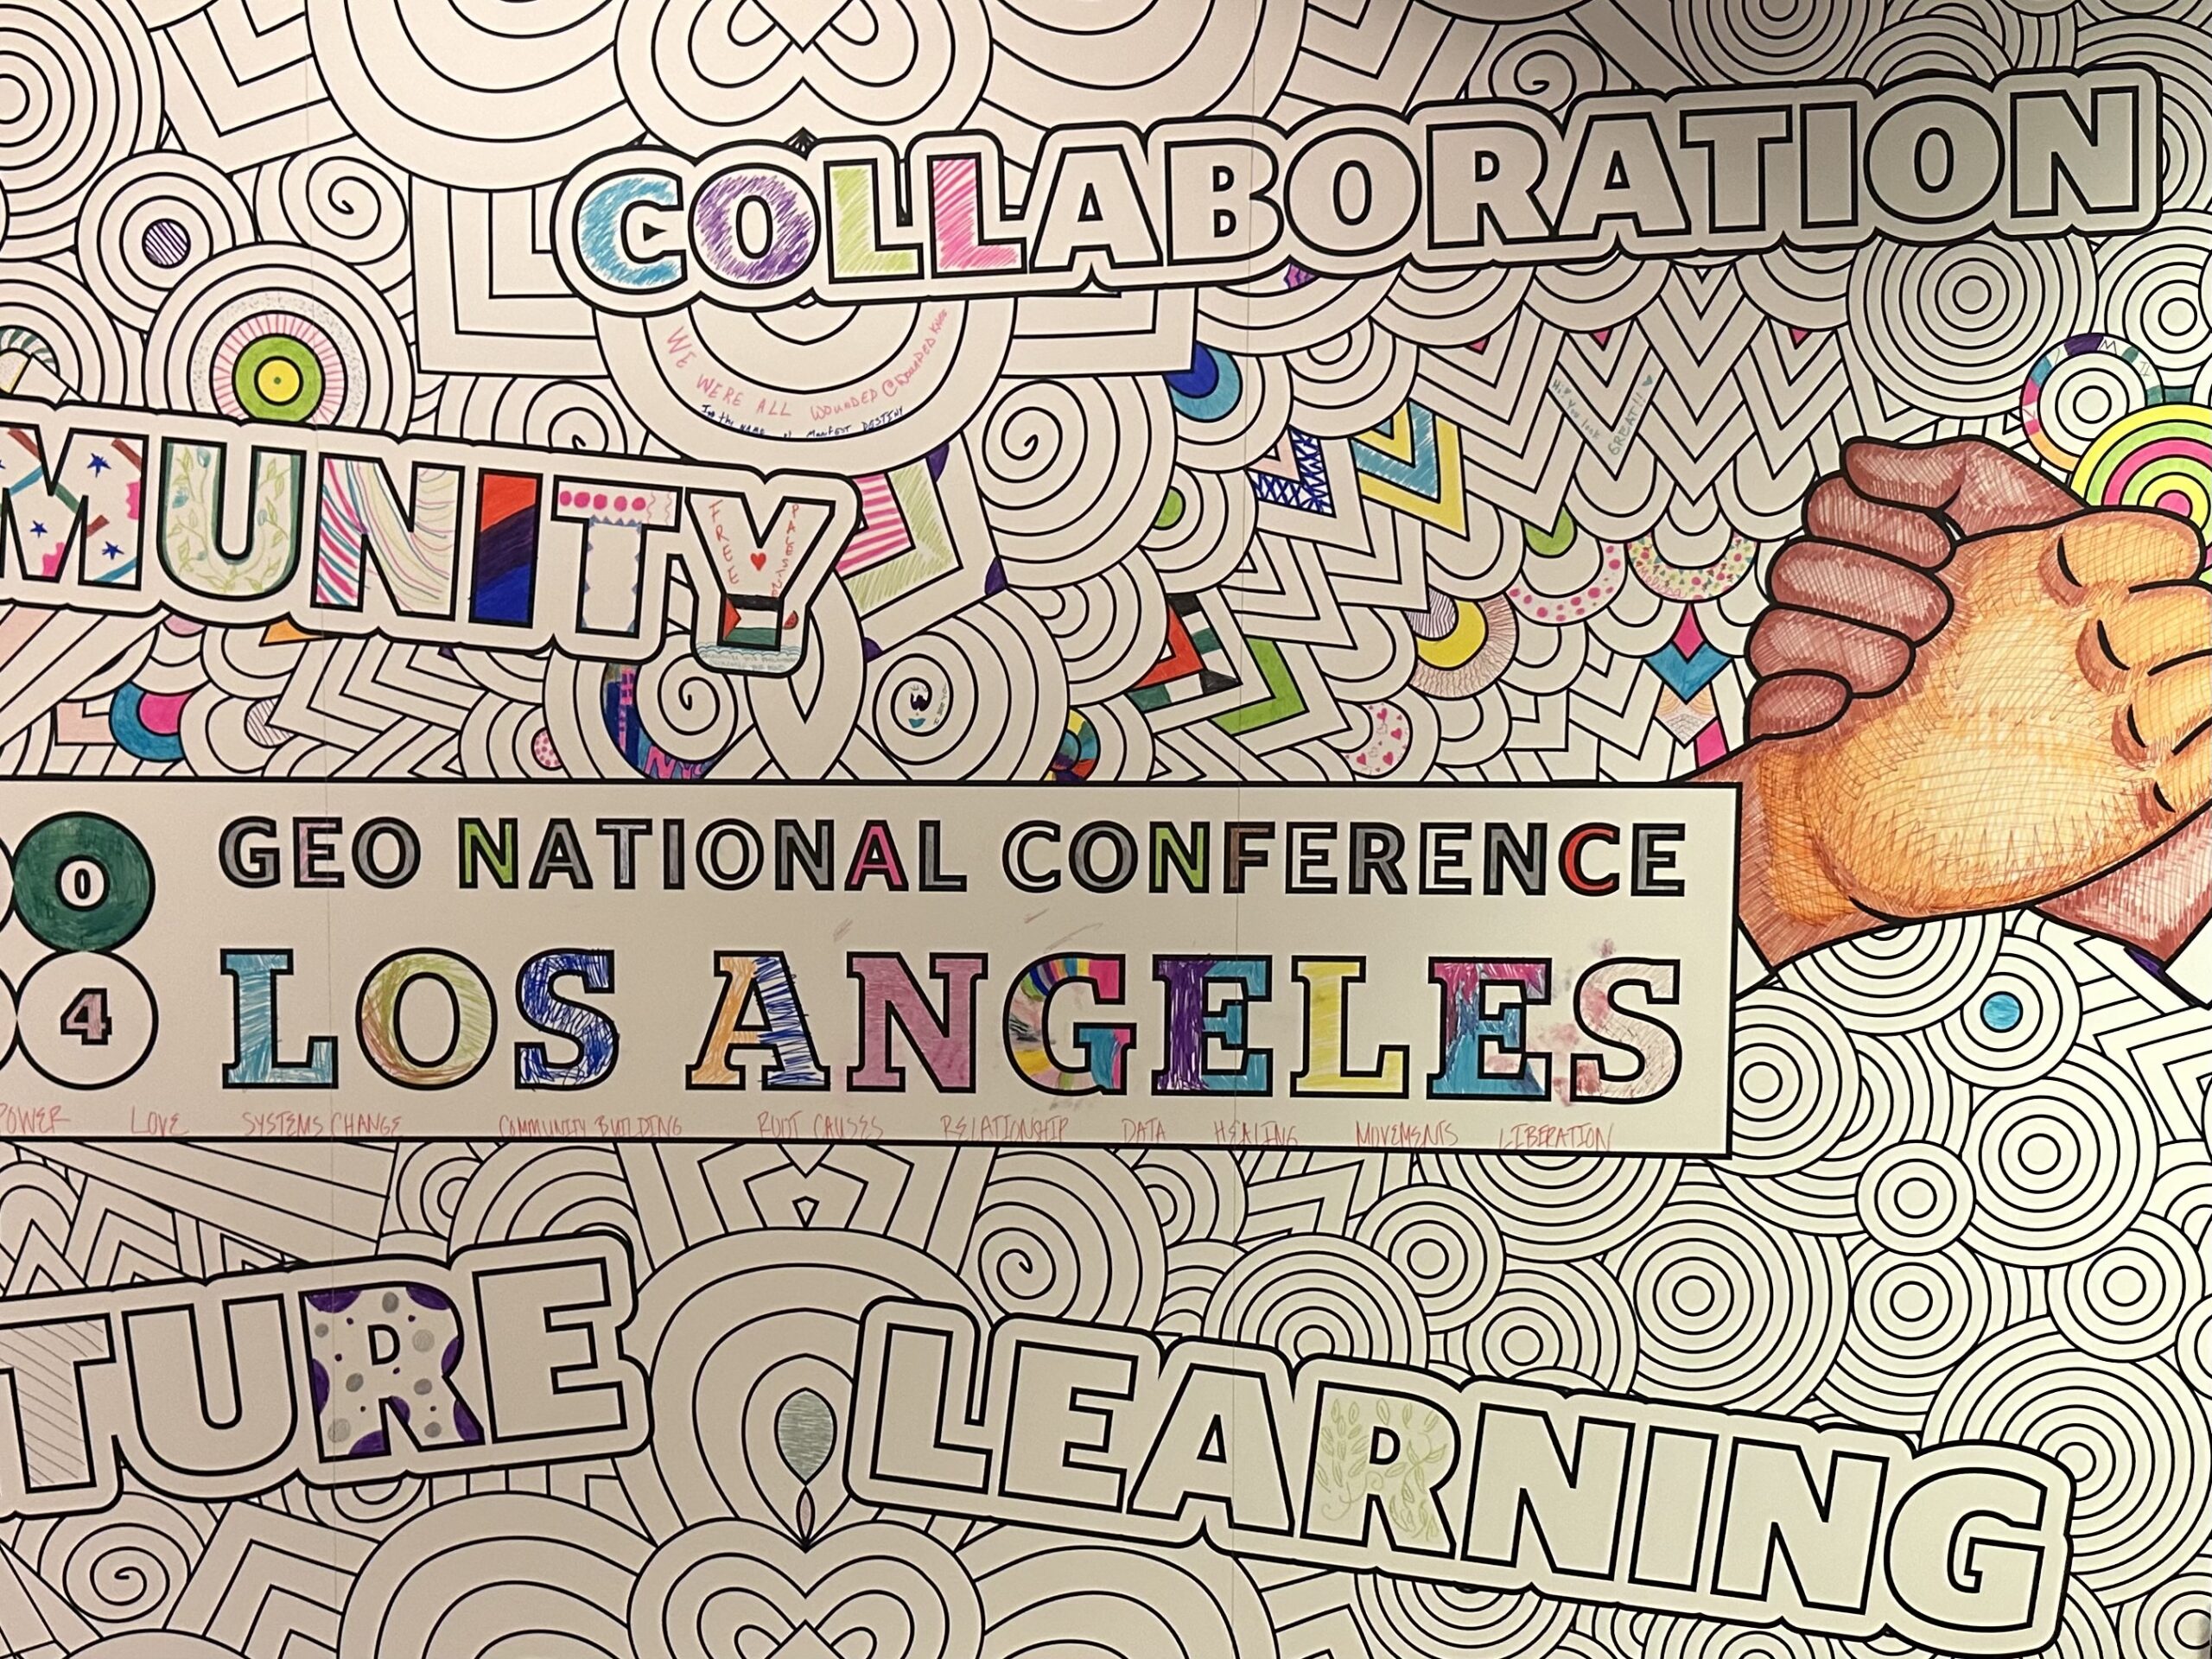 Art work with GEO National Conference Los Angeles at the center - partly colored by attendees